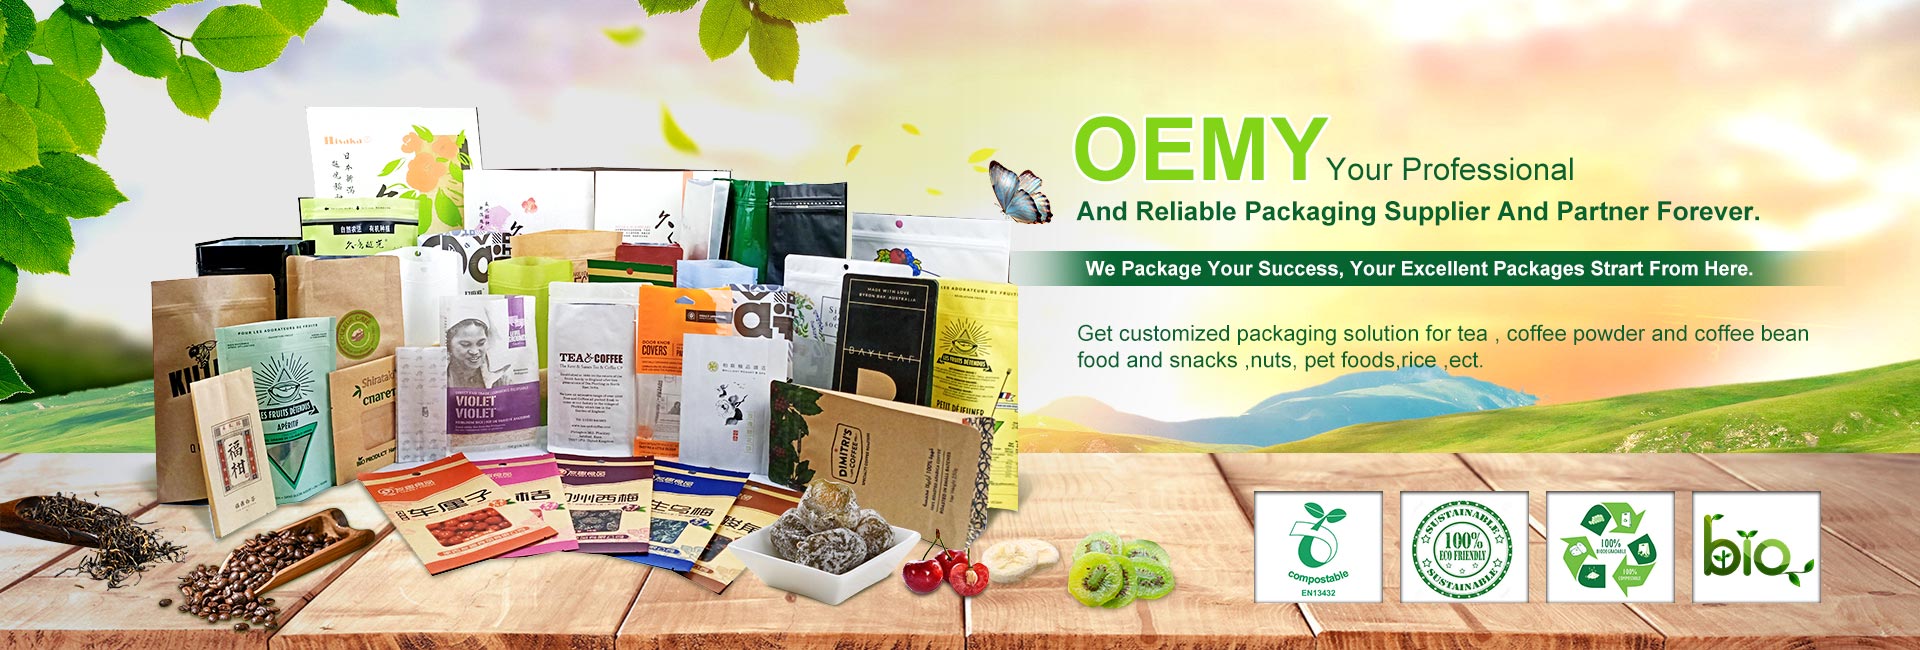 OEMY Your Professional  And Reliable Packaging Supplier And Partner Forever.